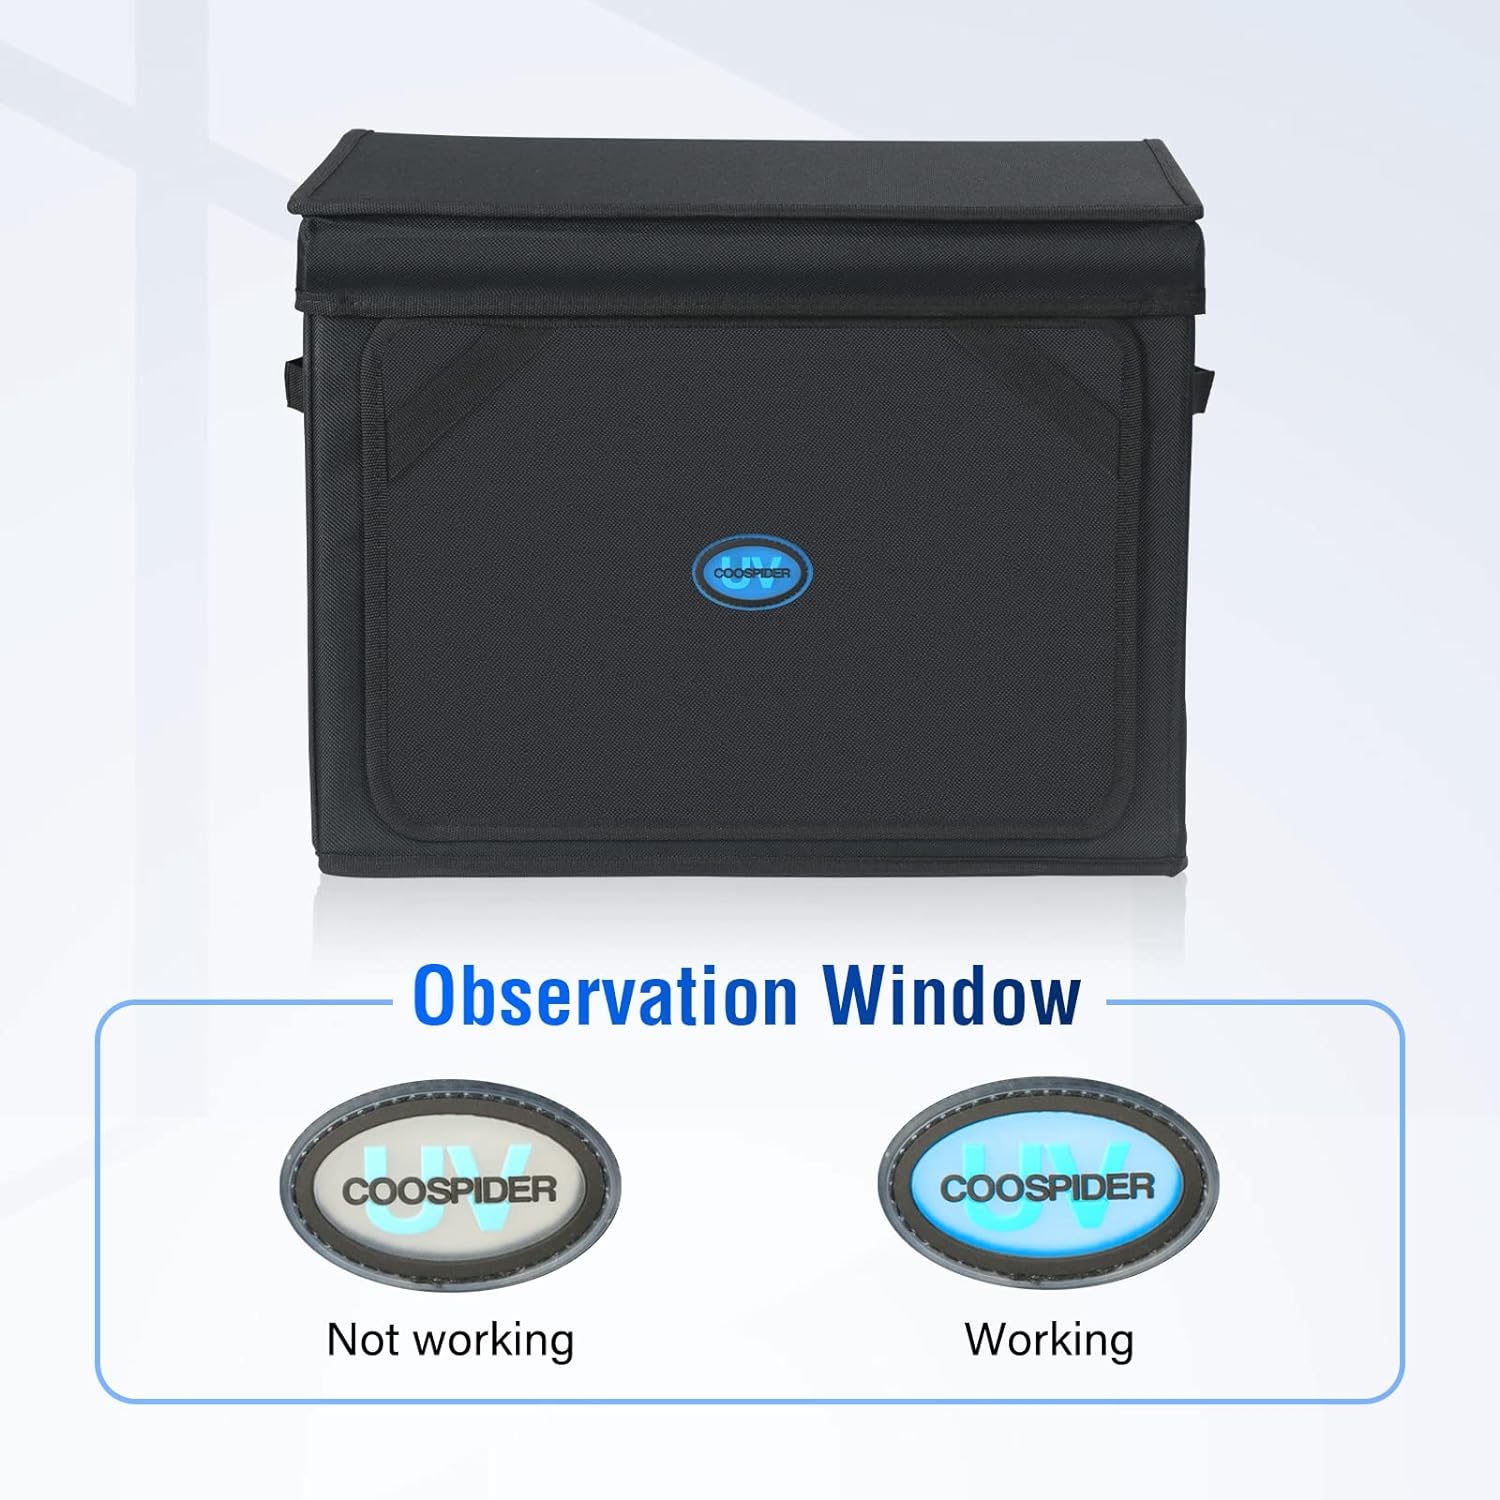 UV Light for Resin Curing High Efficiency 365nm UV Resin Kit for 3D Printer Large Size Sturdy Iron Frame Visual Window Even Curing LCD SLA DLP Compatible (Resin Curing Bag)